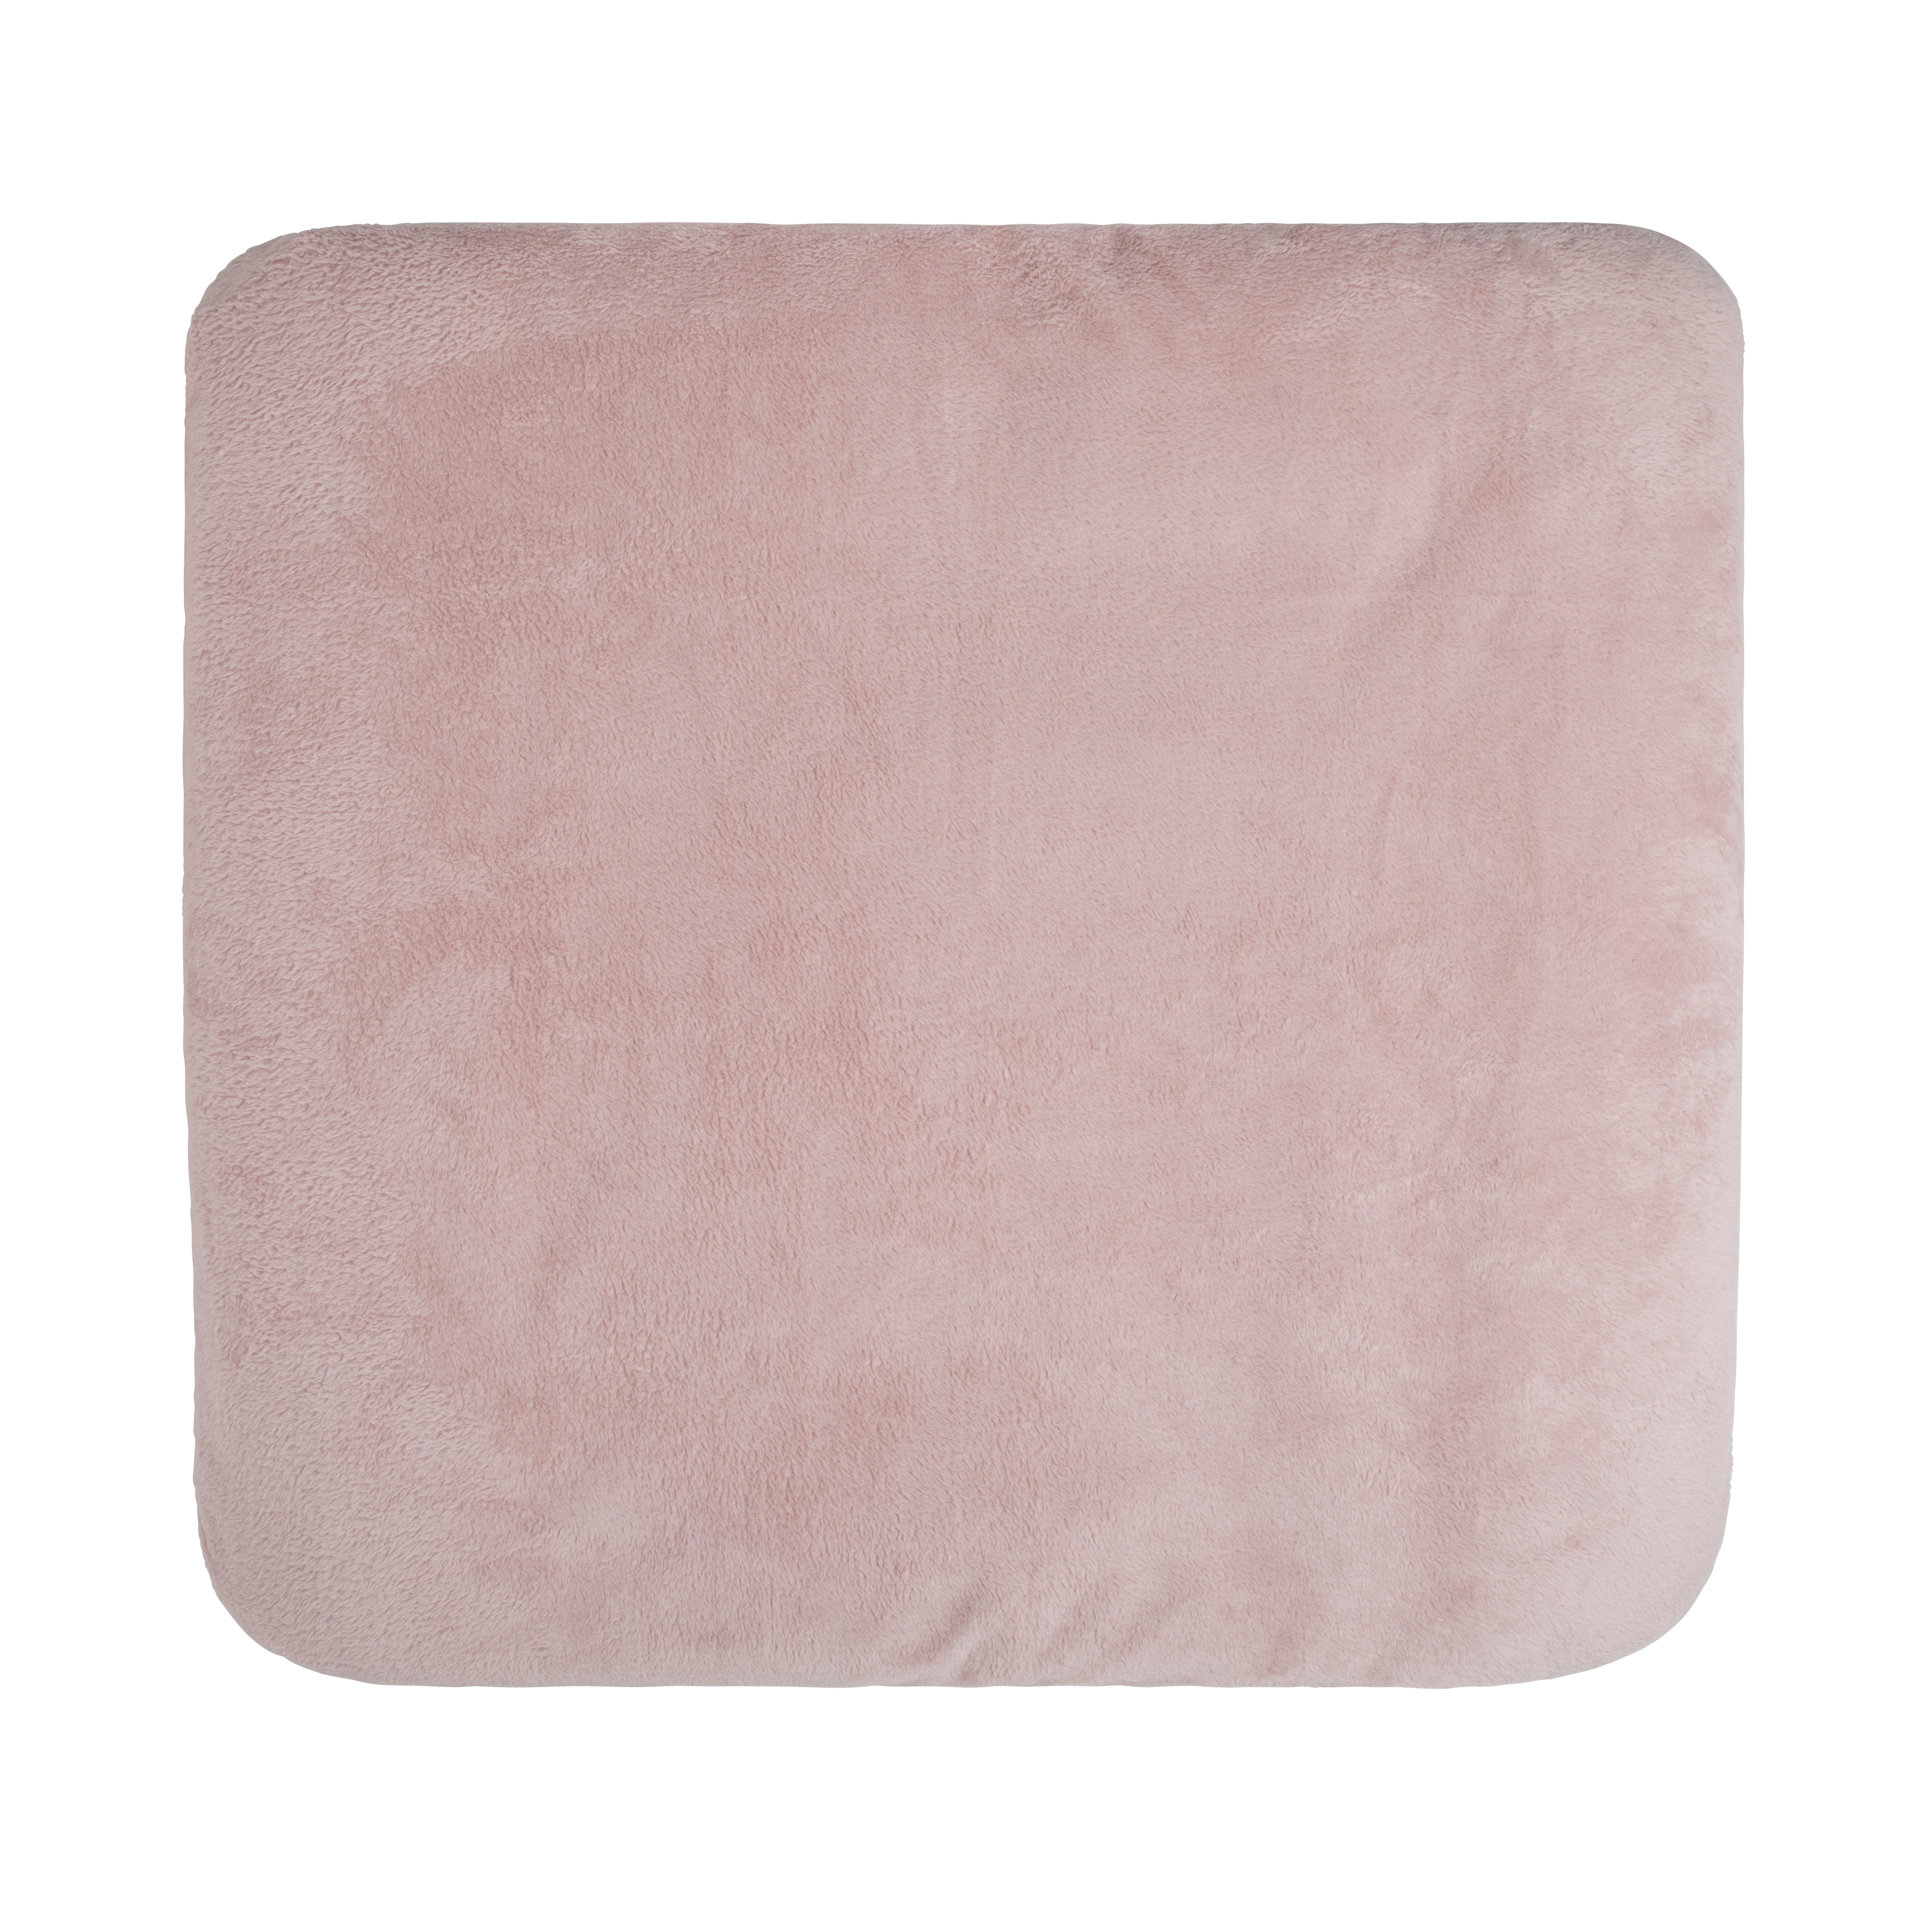 Changing pad cover Cozy old pink - 75x85